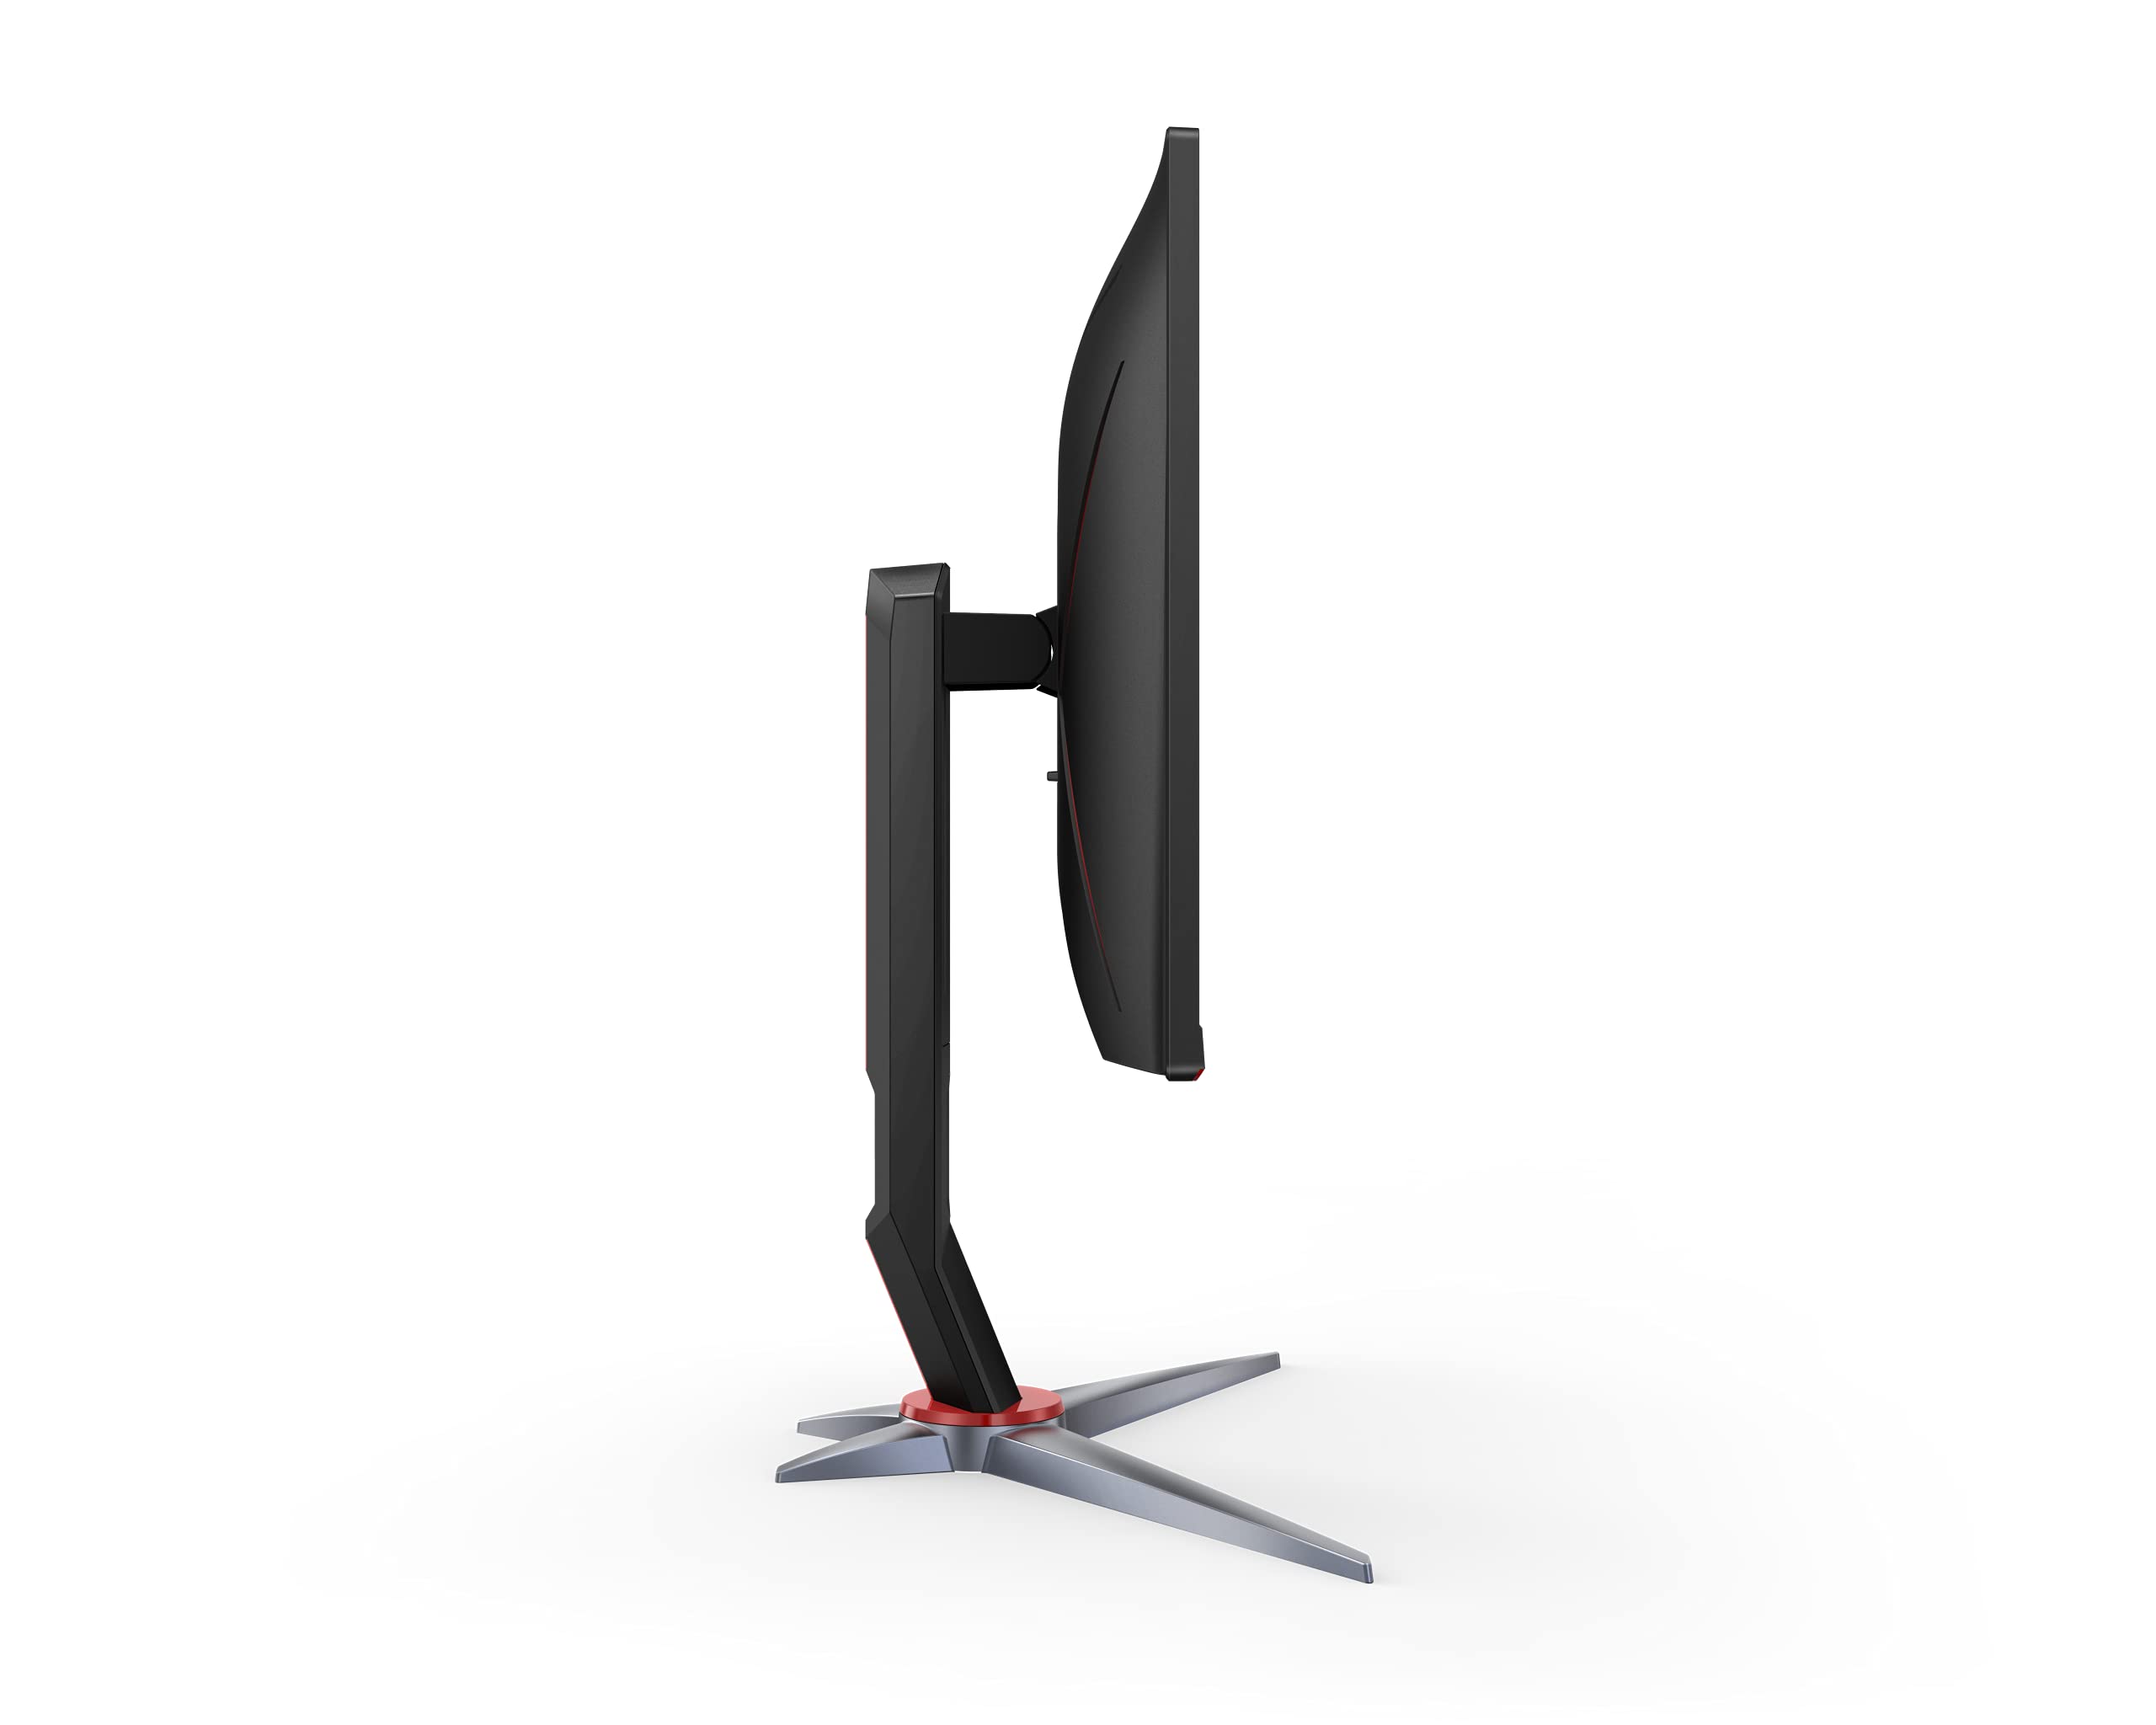 AOC Gaming 24G2S 24” Frameless Gaming Monitor, Full HD 1920x1080, 165Hz 1ms, Adaptive-Sync, Height Adjustable Stand, Black